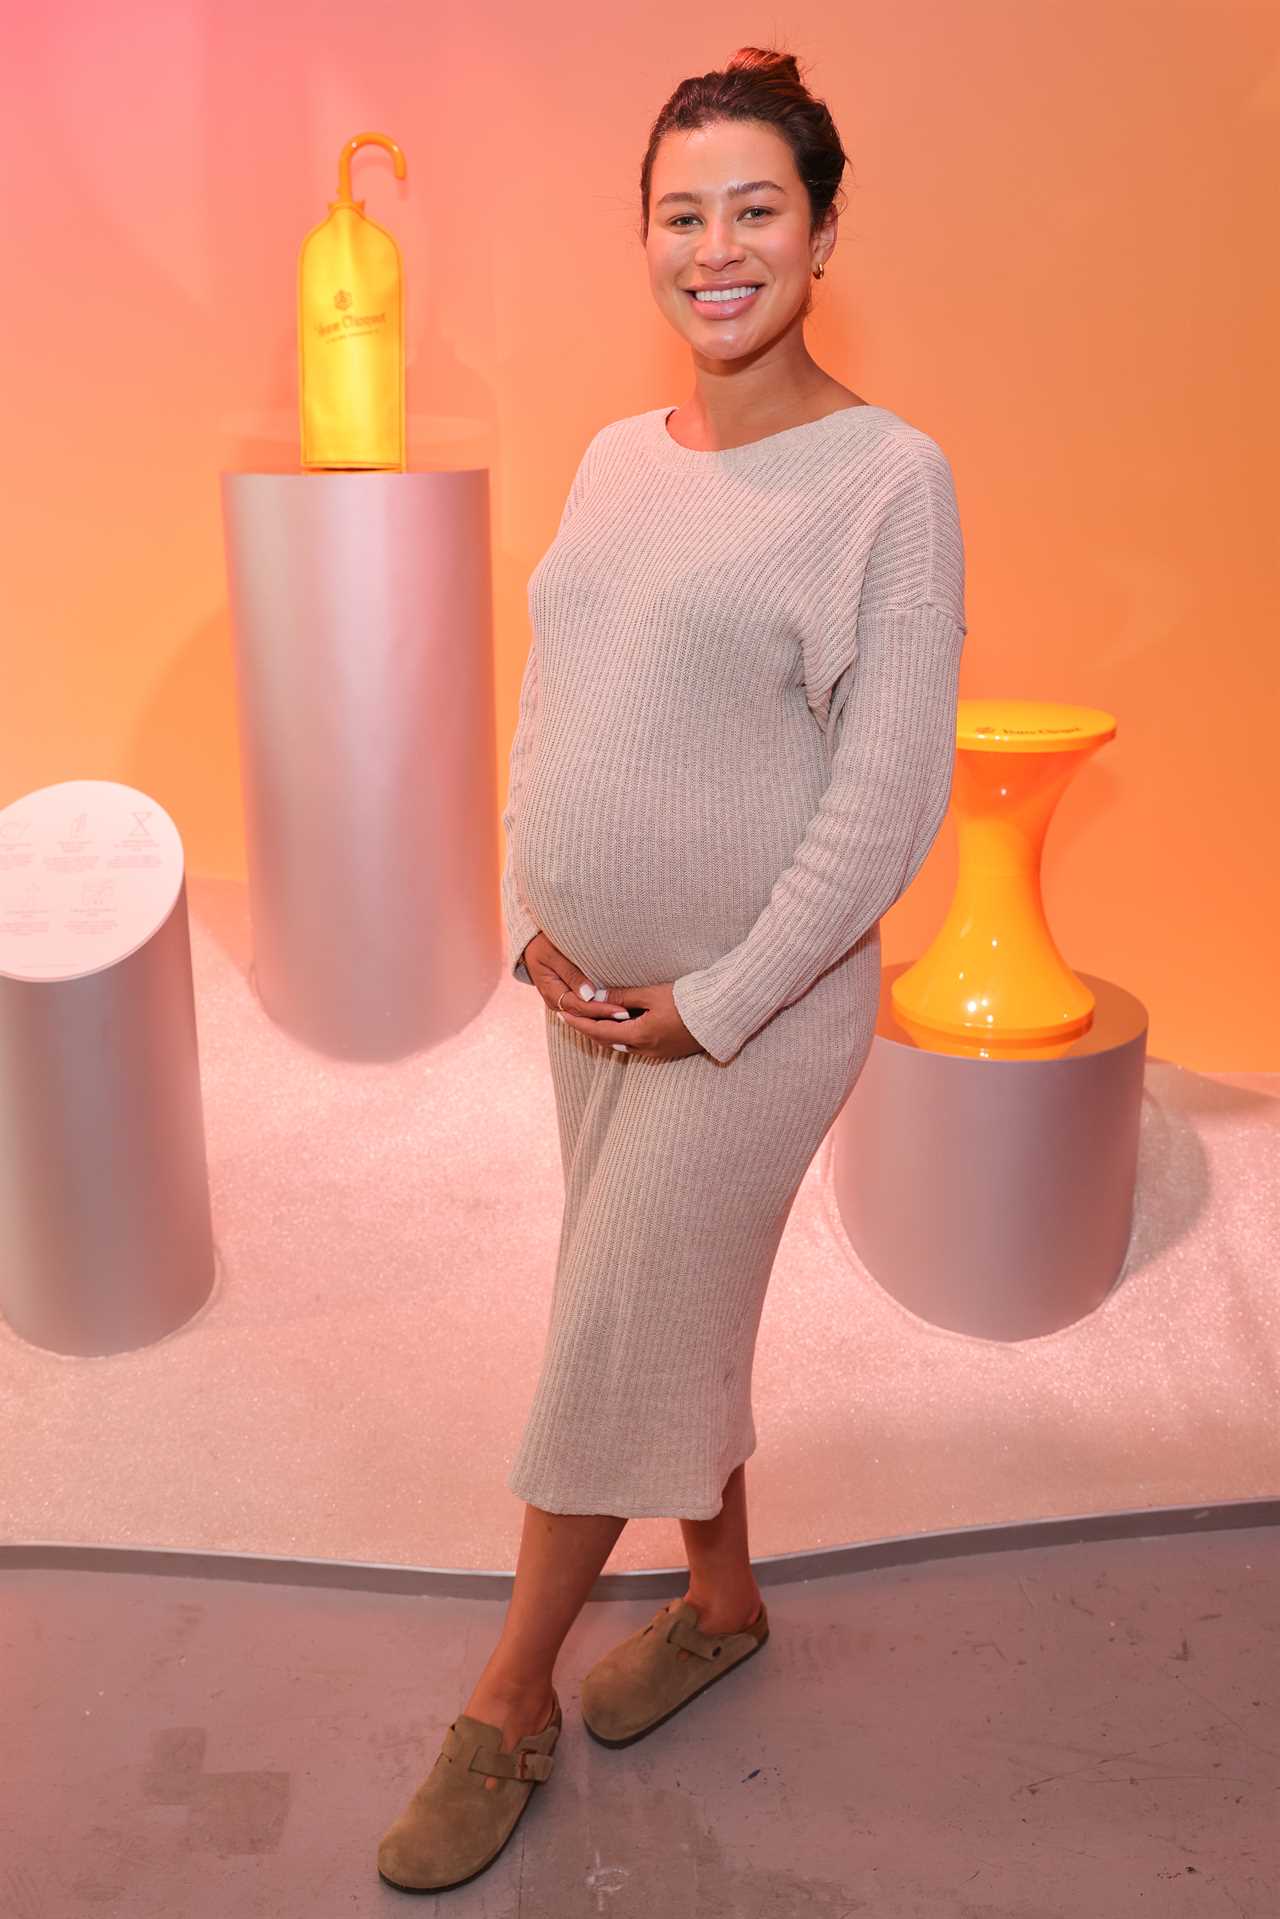 Love Island’s Montana Brown shows off her incredible post-baby body in skintight dress just 4 weeks after giving birth